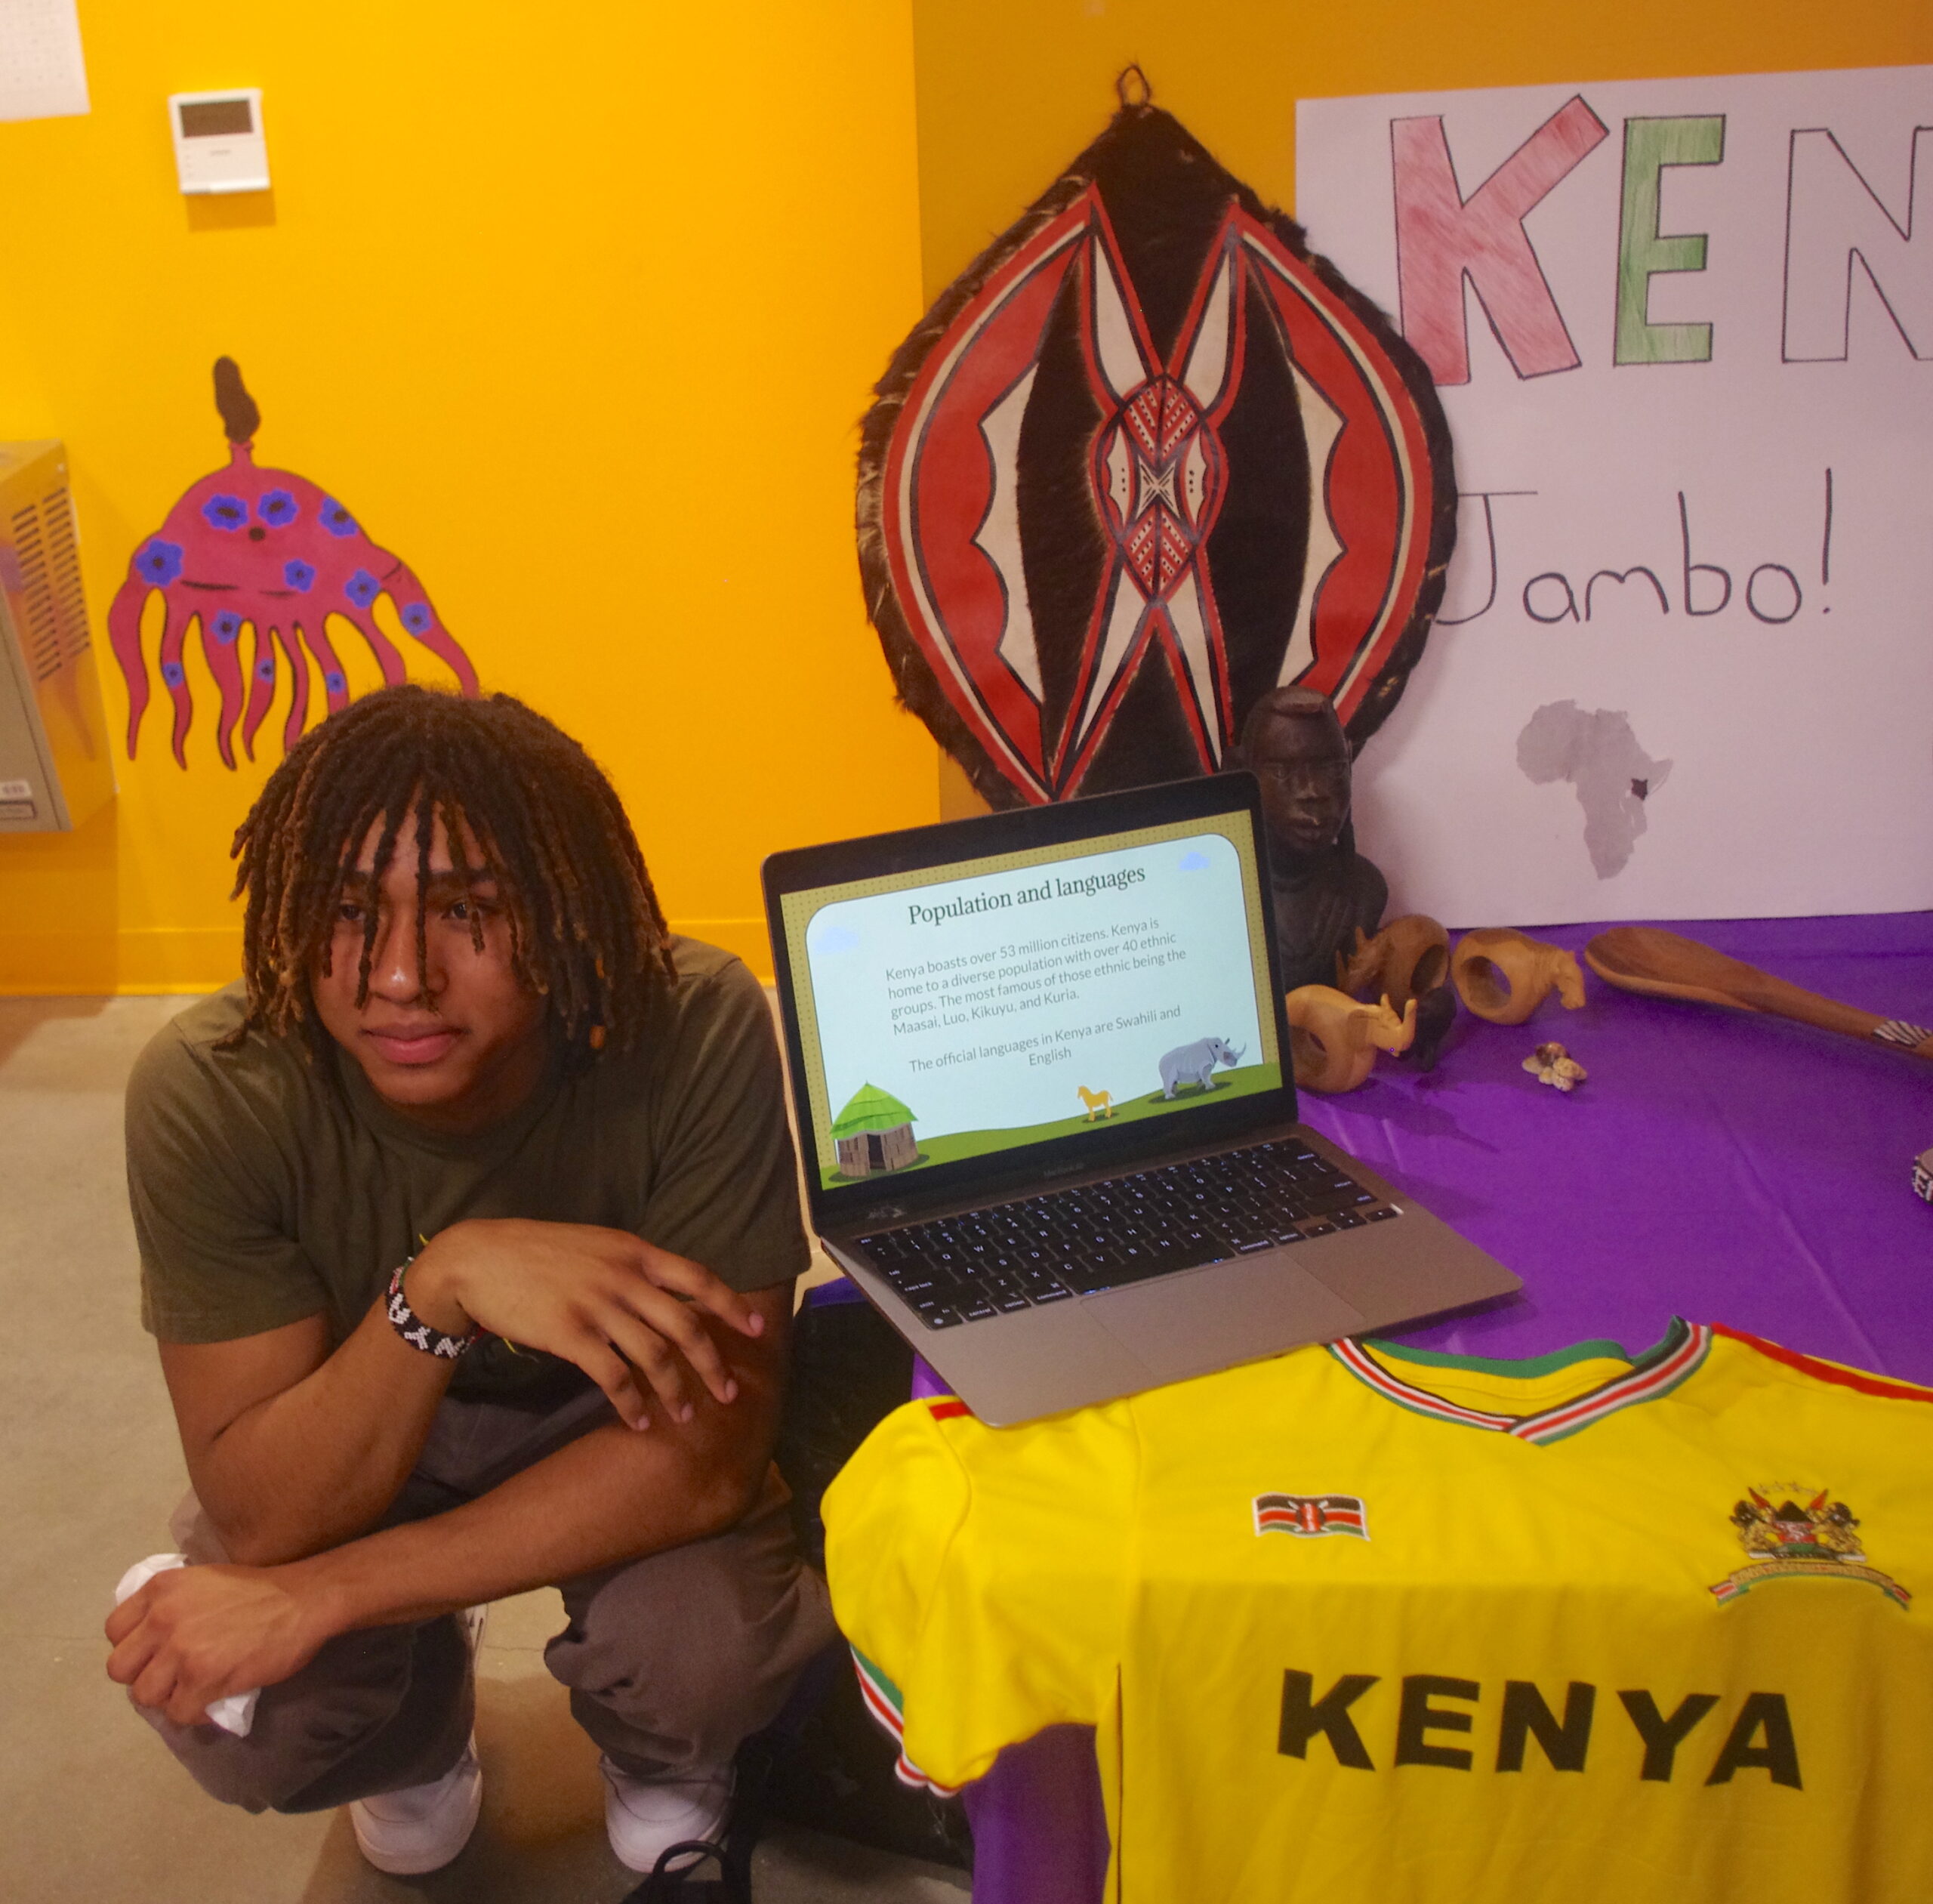 Student squatting next to his culture display